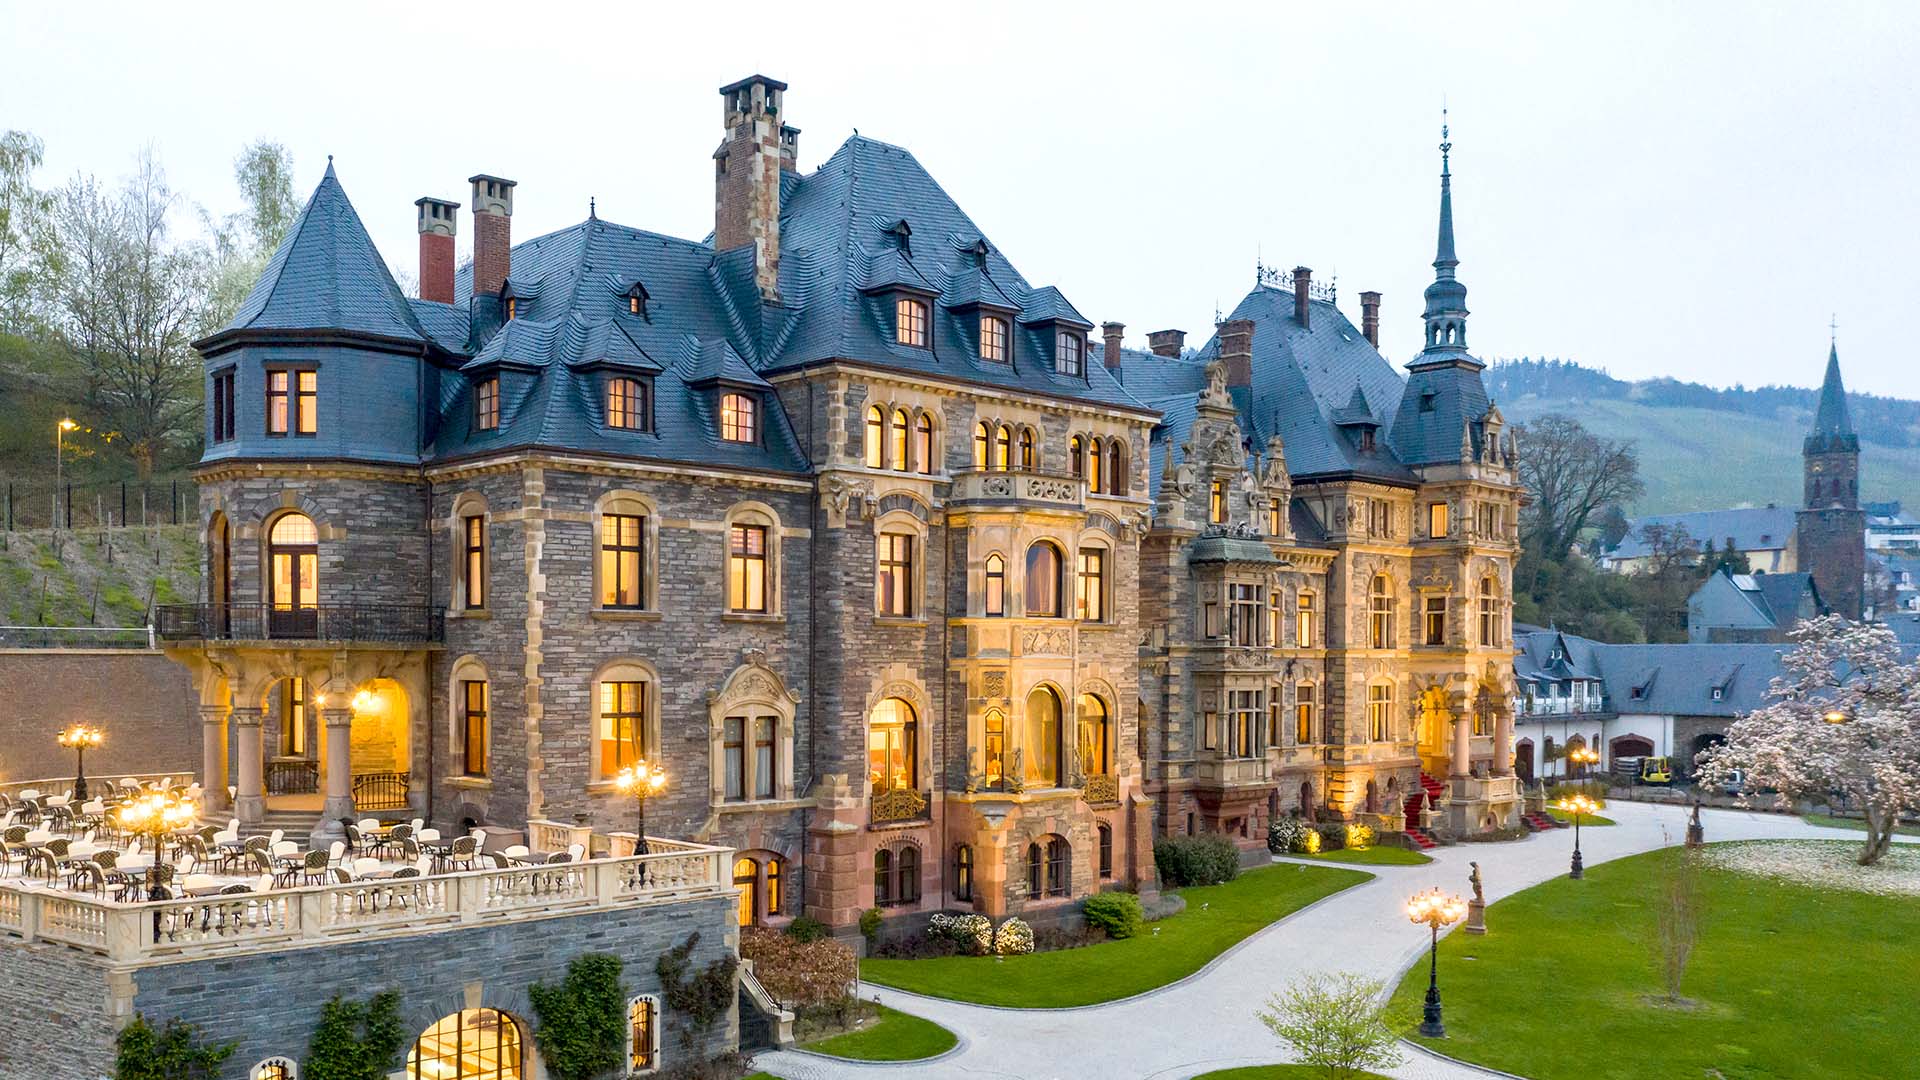 stone palace hotel, Schloss Lieser, Autograph Collection in Germany Mossel Valley